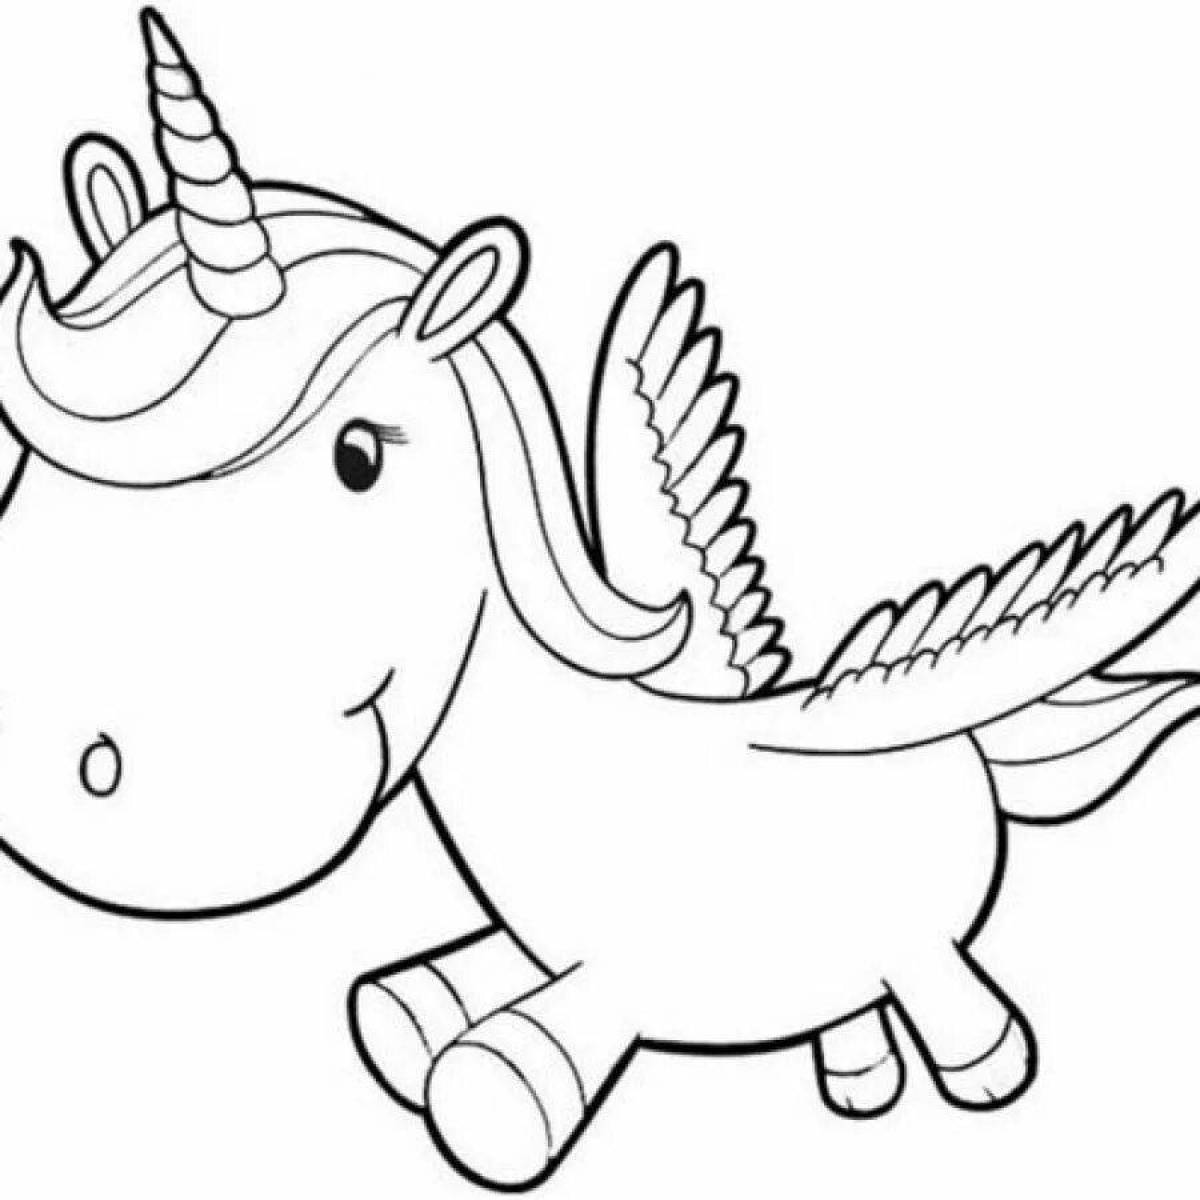 Tempting coloring drawing of a unicorn